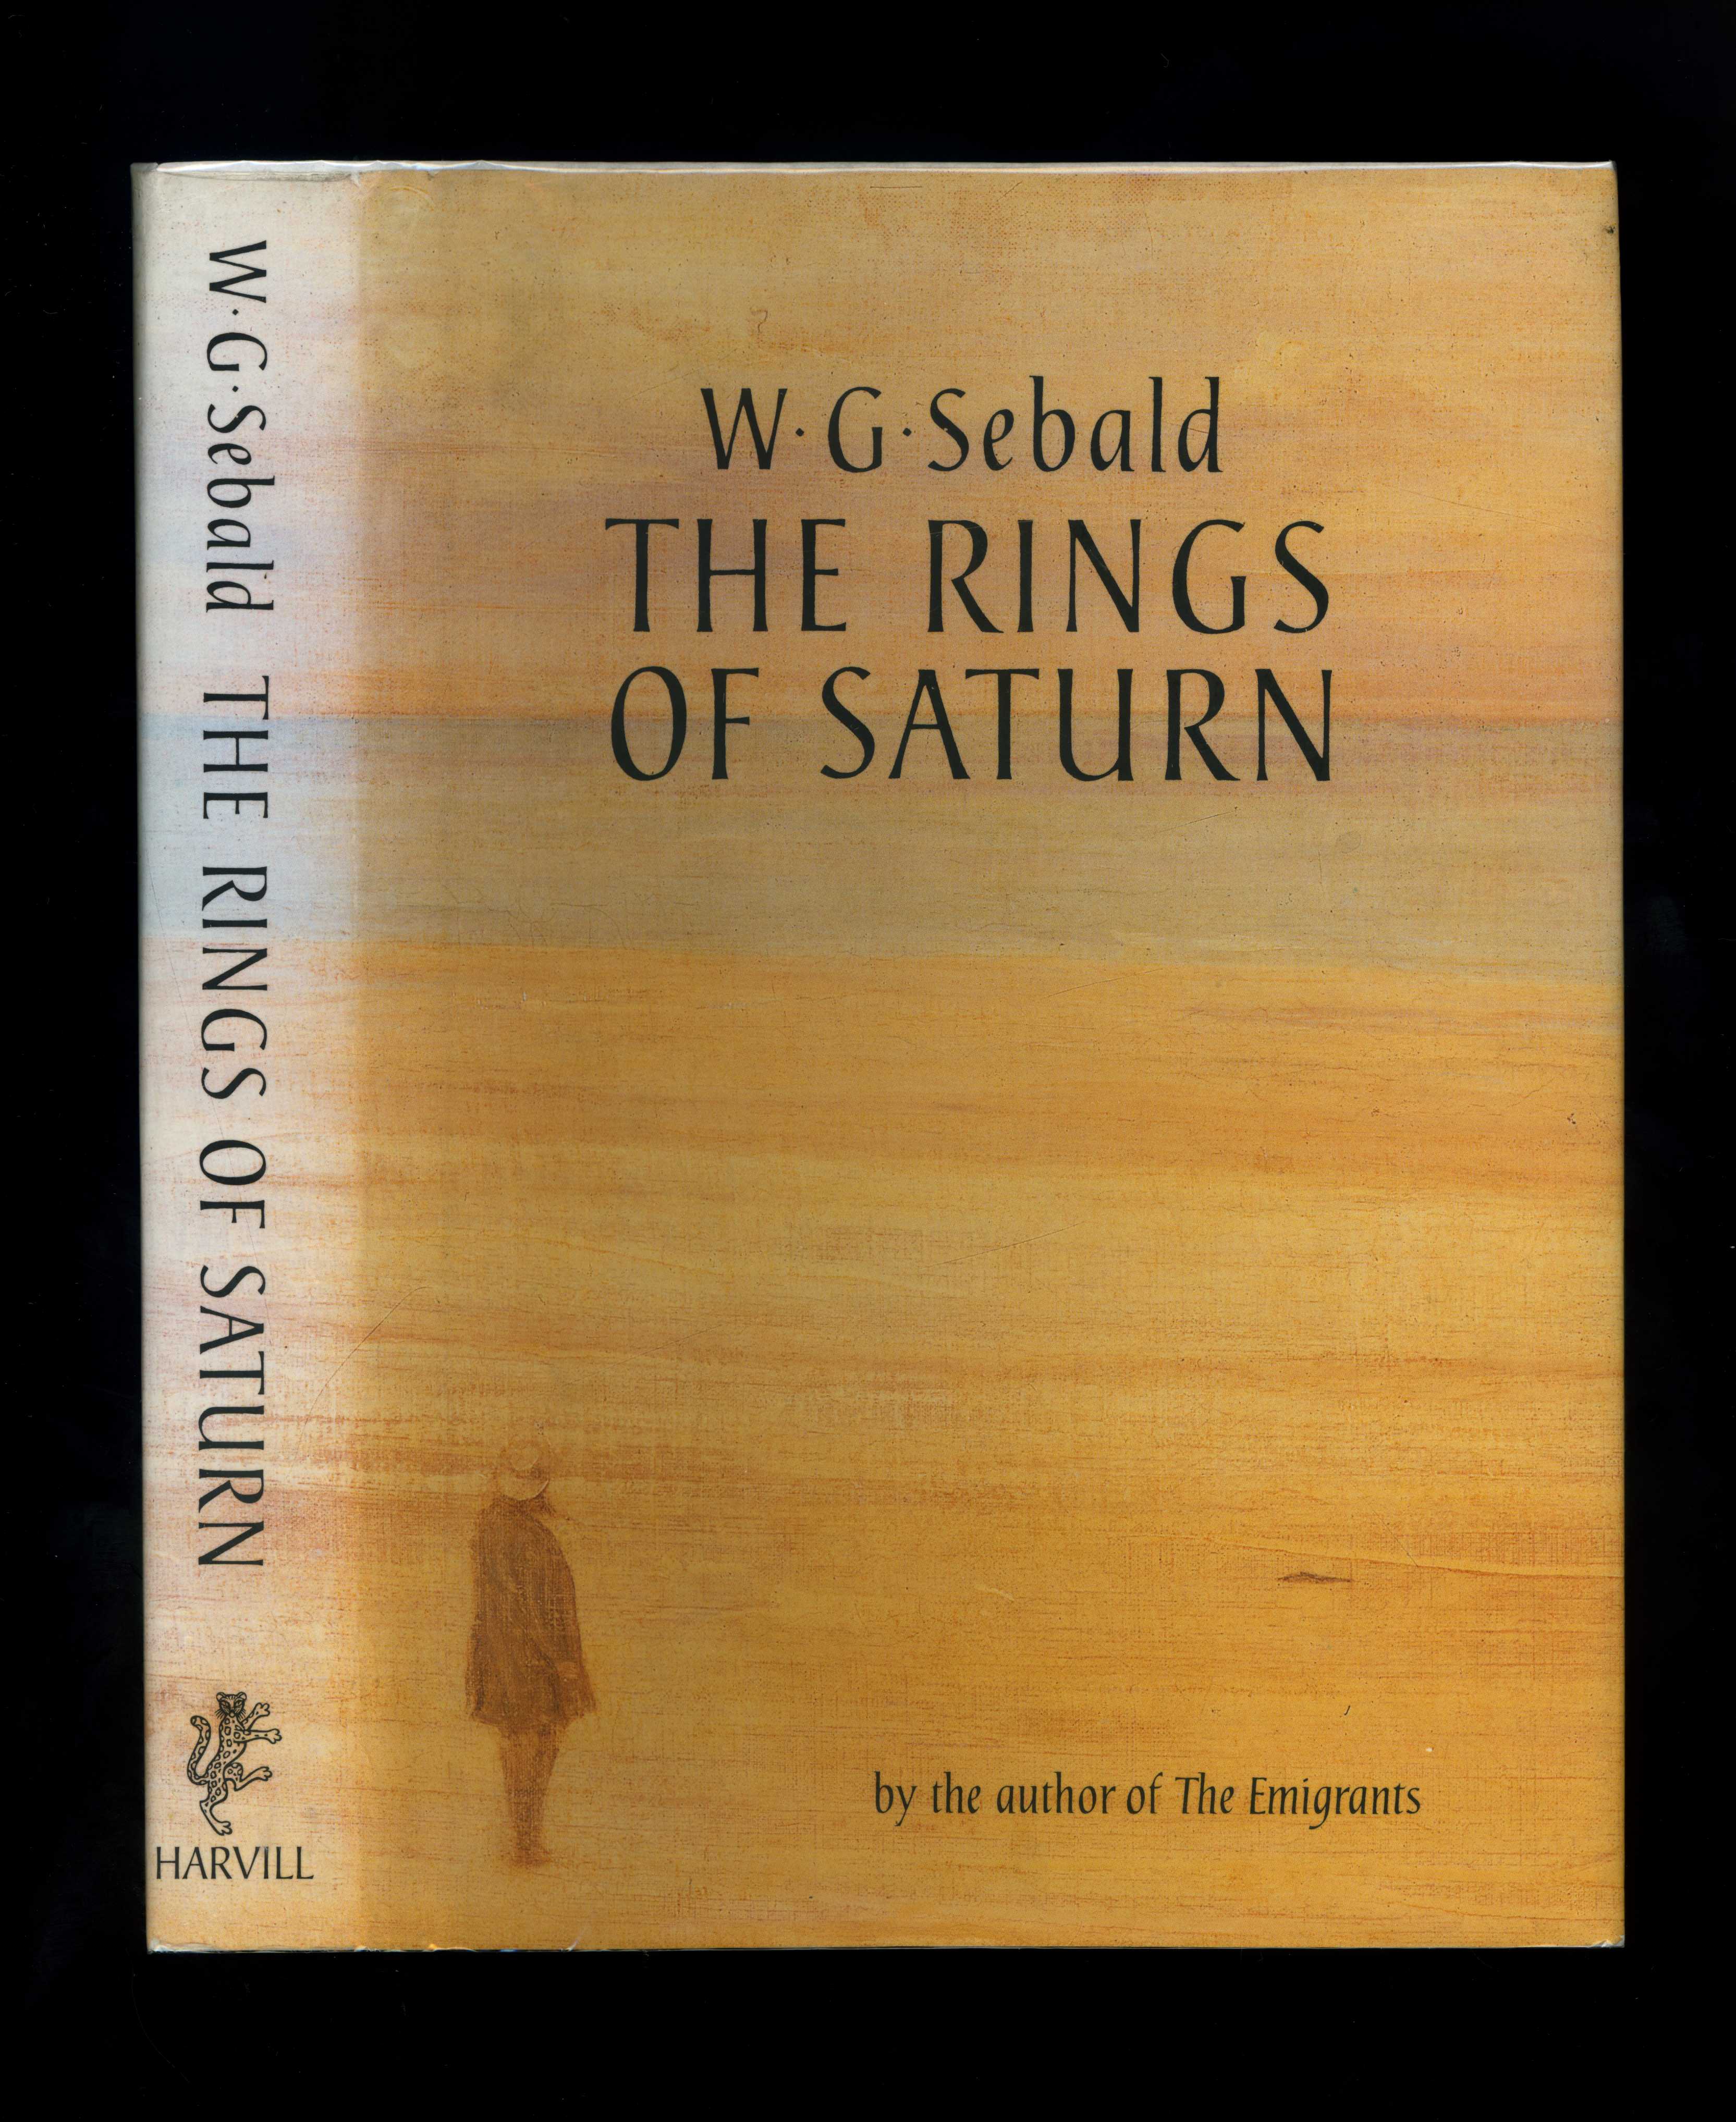 THE RINGS OF SATURN (1/2 - scarce hardcover issue - ex library copy) - W. G. Sebald (Translated from the German by Michael Hulse)